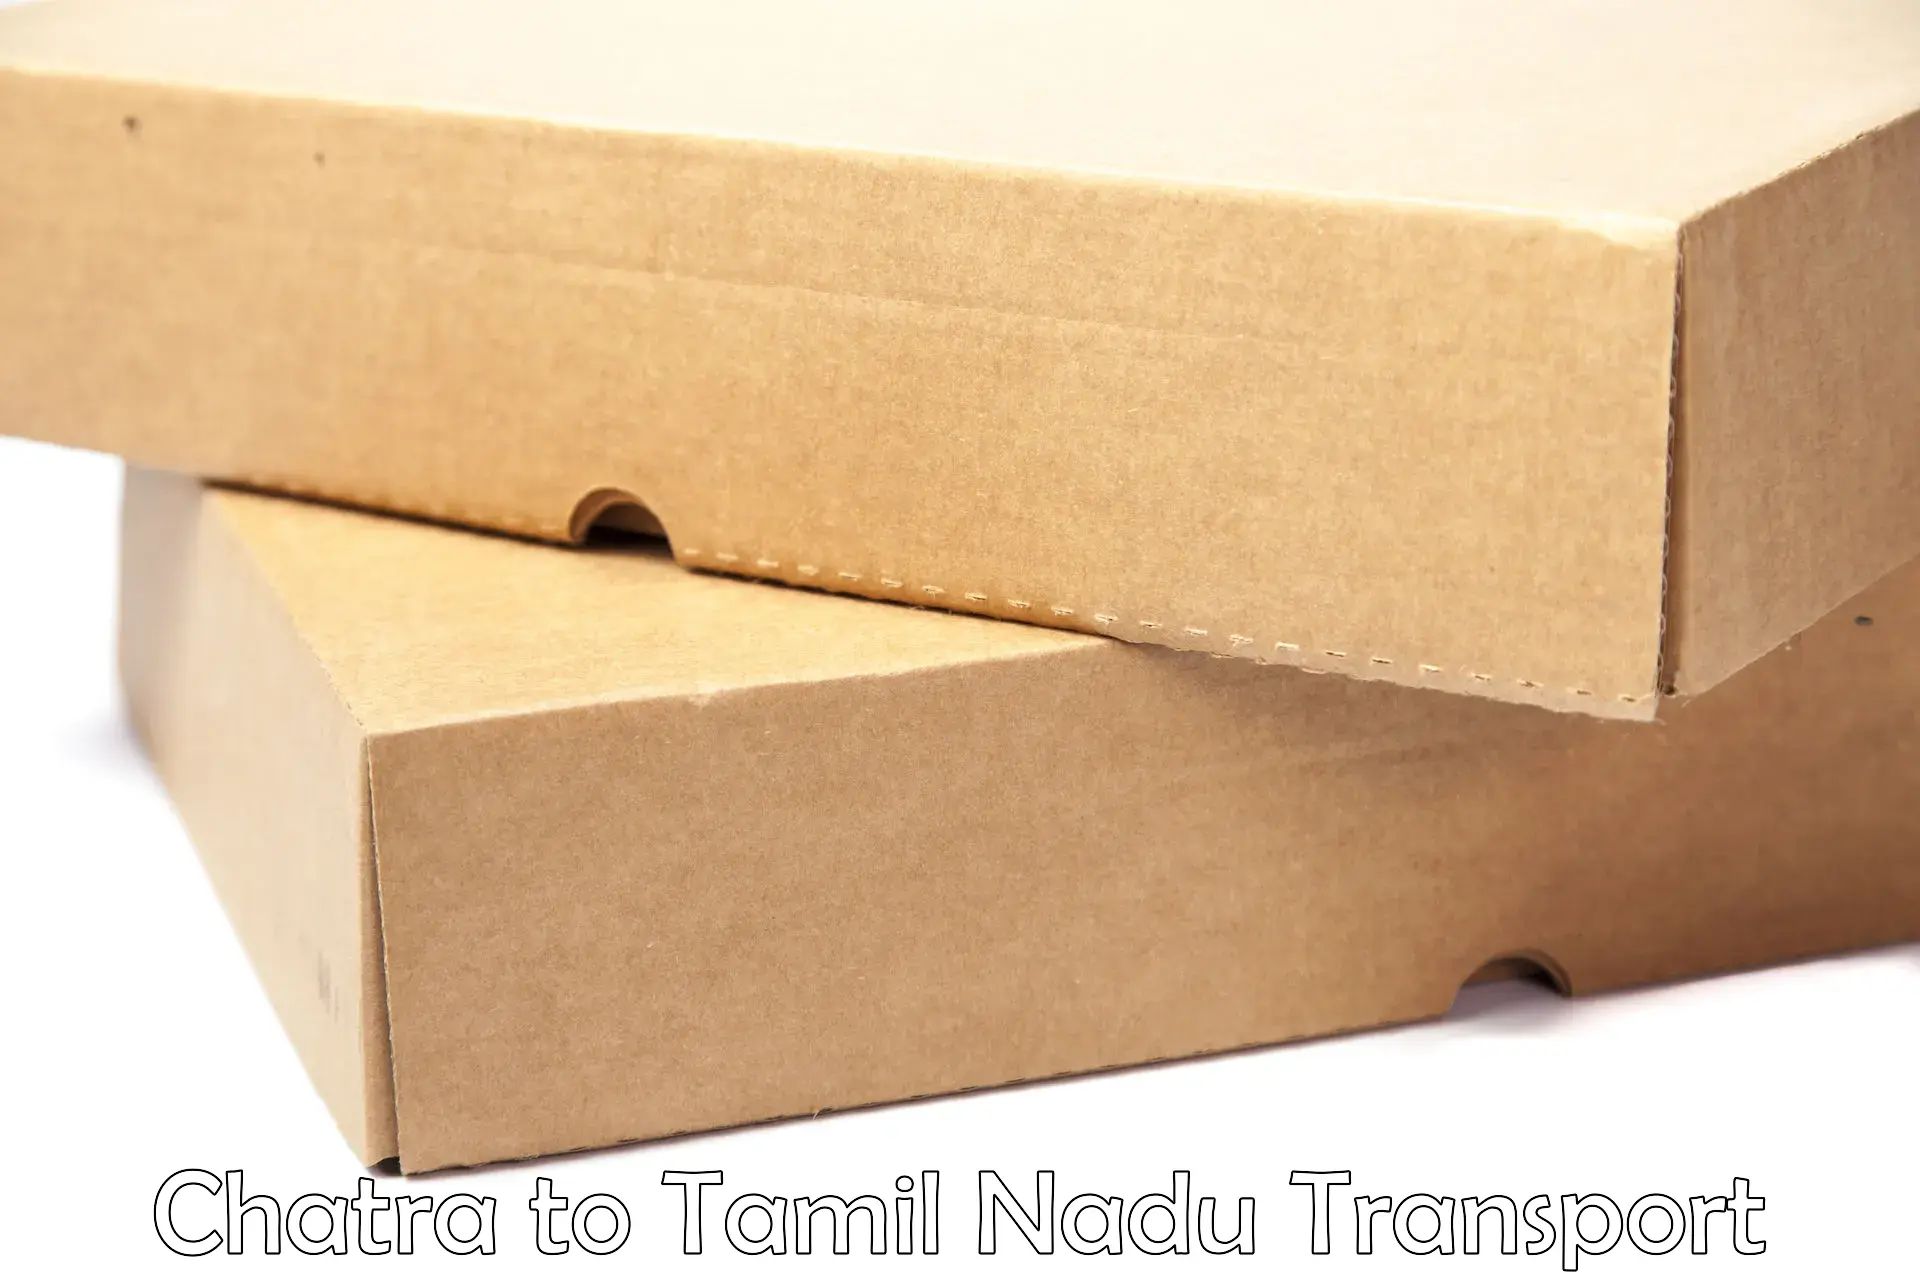 Transport shared services Chatra to Thisayanvilai